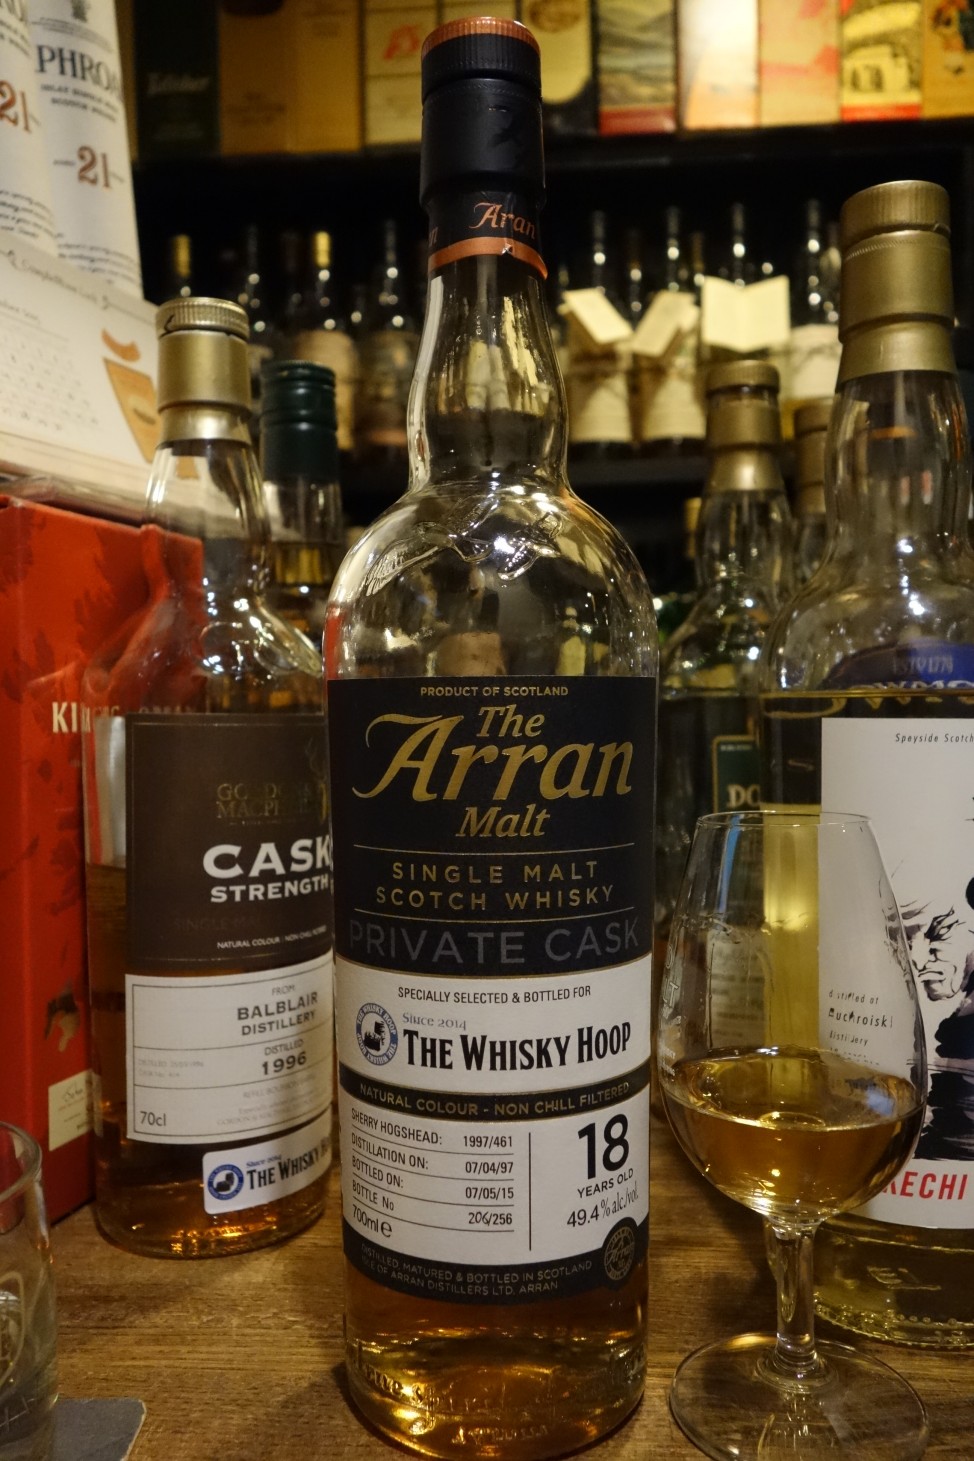 ISLE OF ARRAN 1997-2015 18yo OB PRIVATE CASK for THE WHISKY HOOP #1997/461